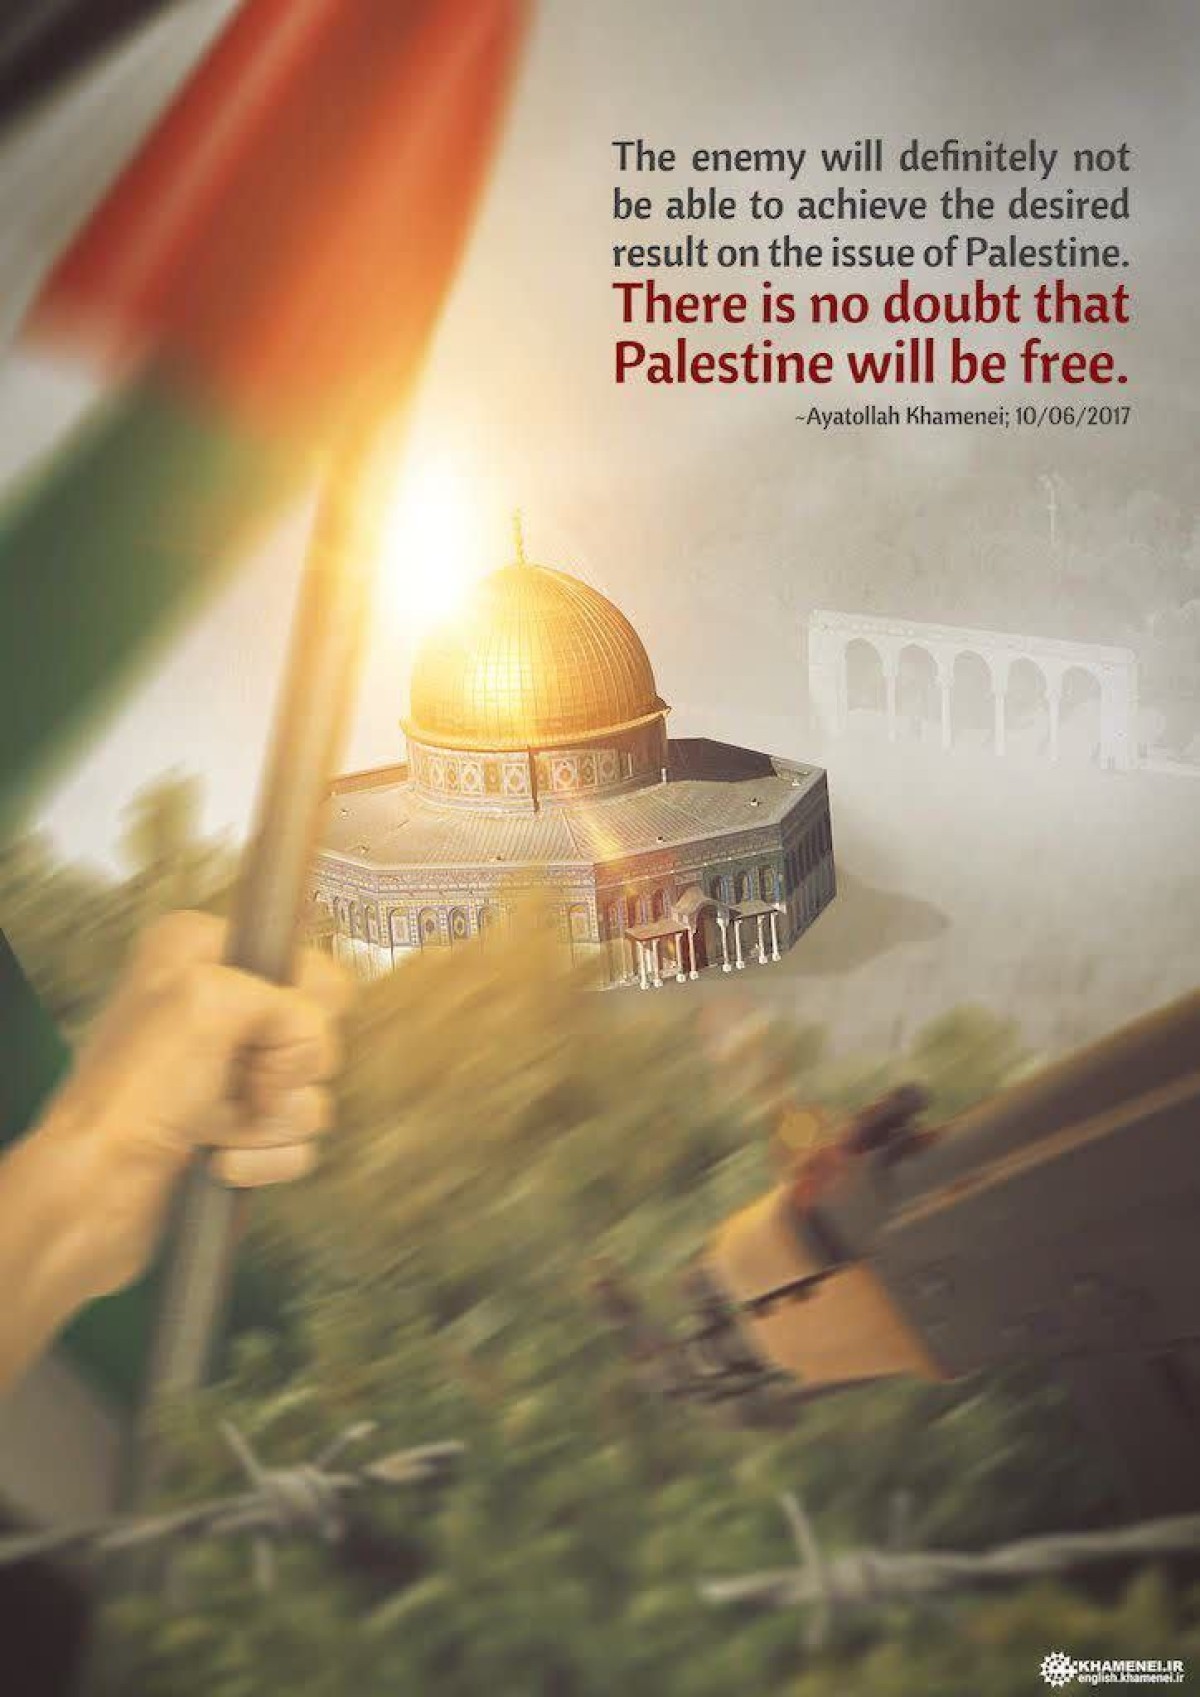 There is no doubt that Palestine will be free